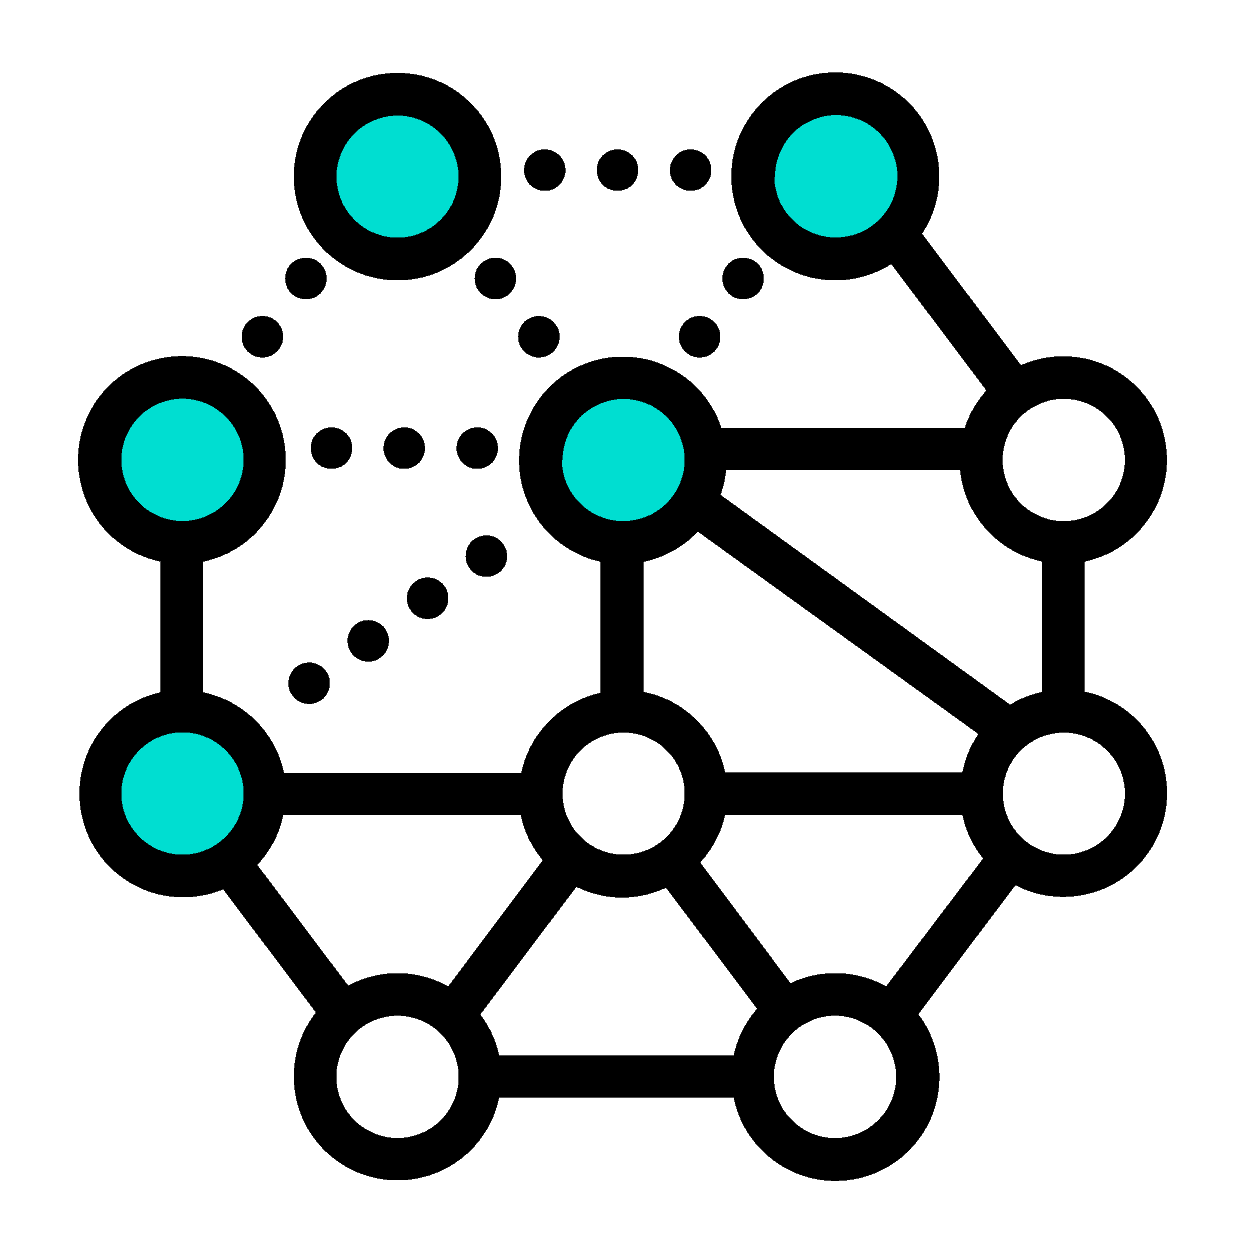 Small circles shaped in octagon that are connected by solid & broken lines representing business systems.